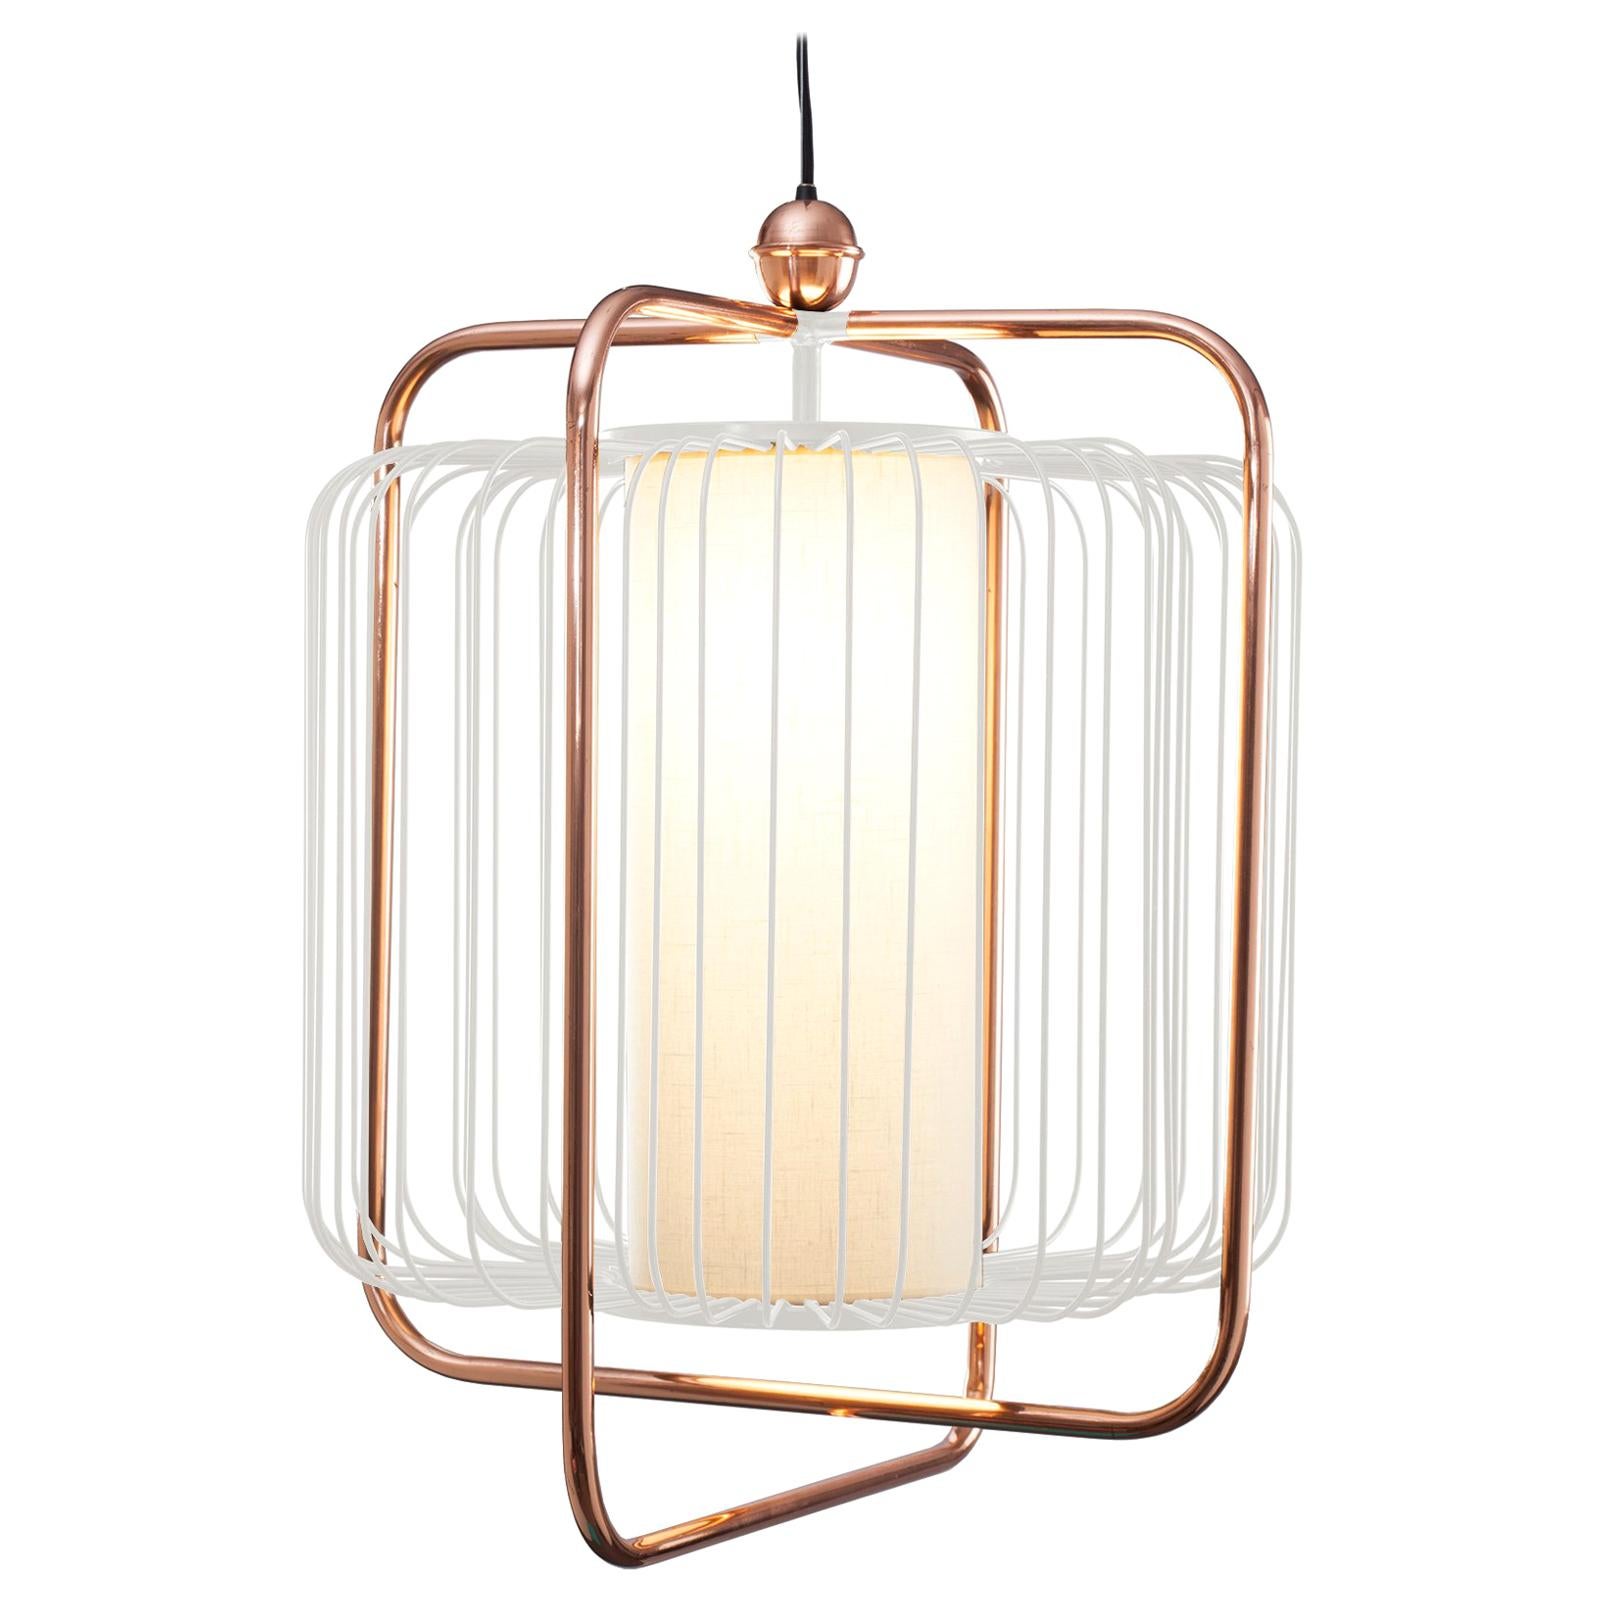 Contemporary Art Deco inspired Jules Pendant Lamp in Copper, Ivory and Linen For Sale